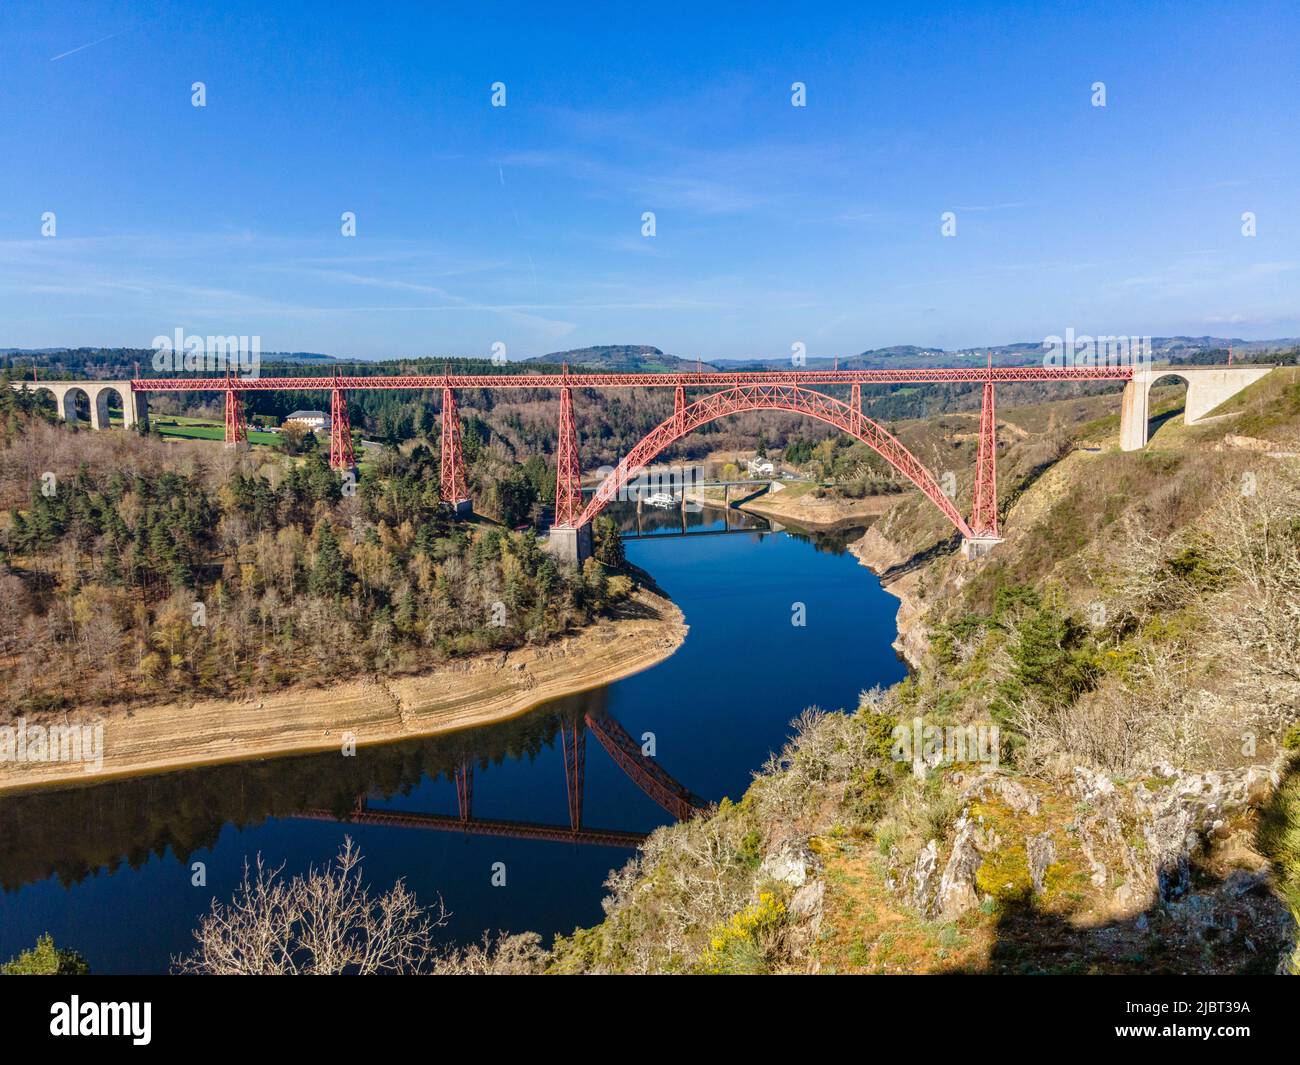 France, Cantal, Ruynes en Margeride, the Truyere river canyon and Garabit viaduct built by Gustave Eiffel (aerial view) Stock Photo